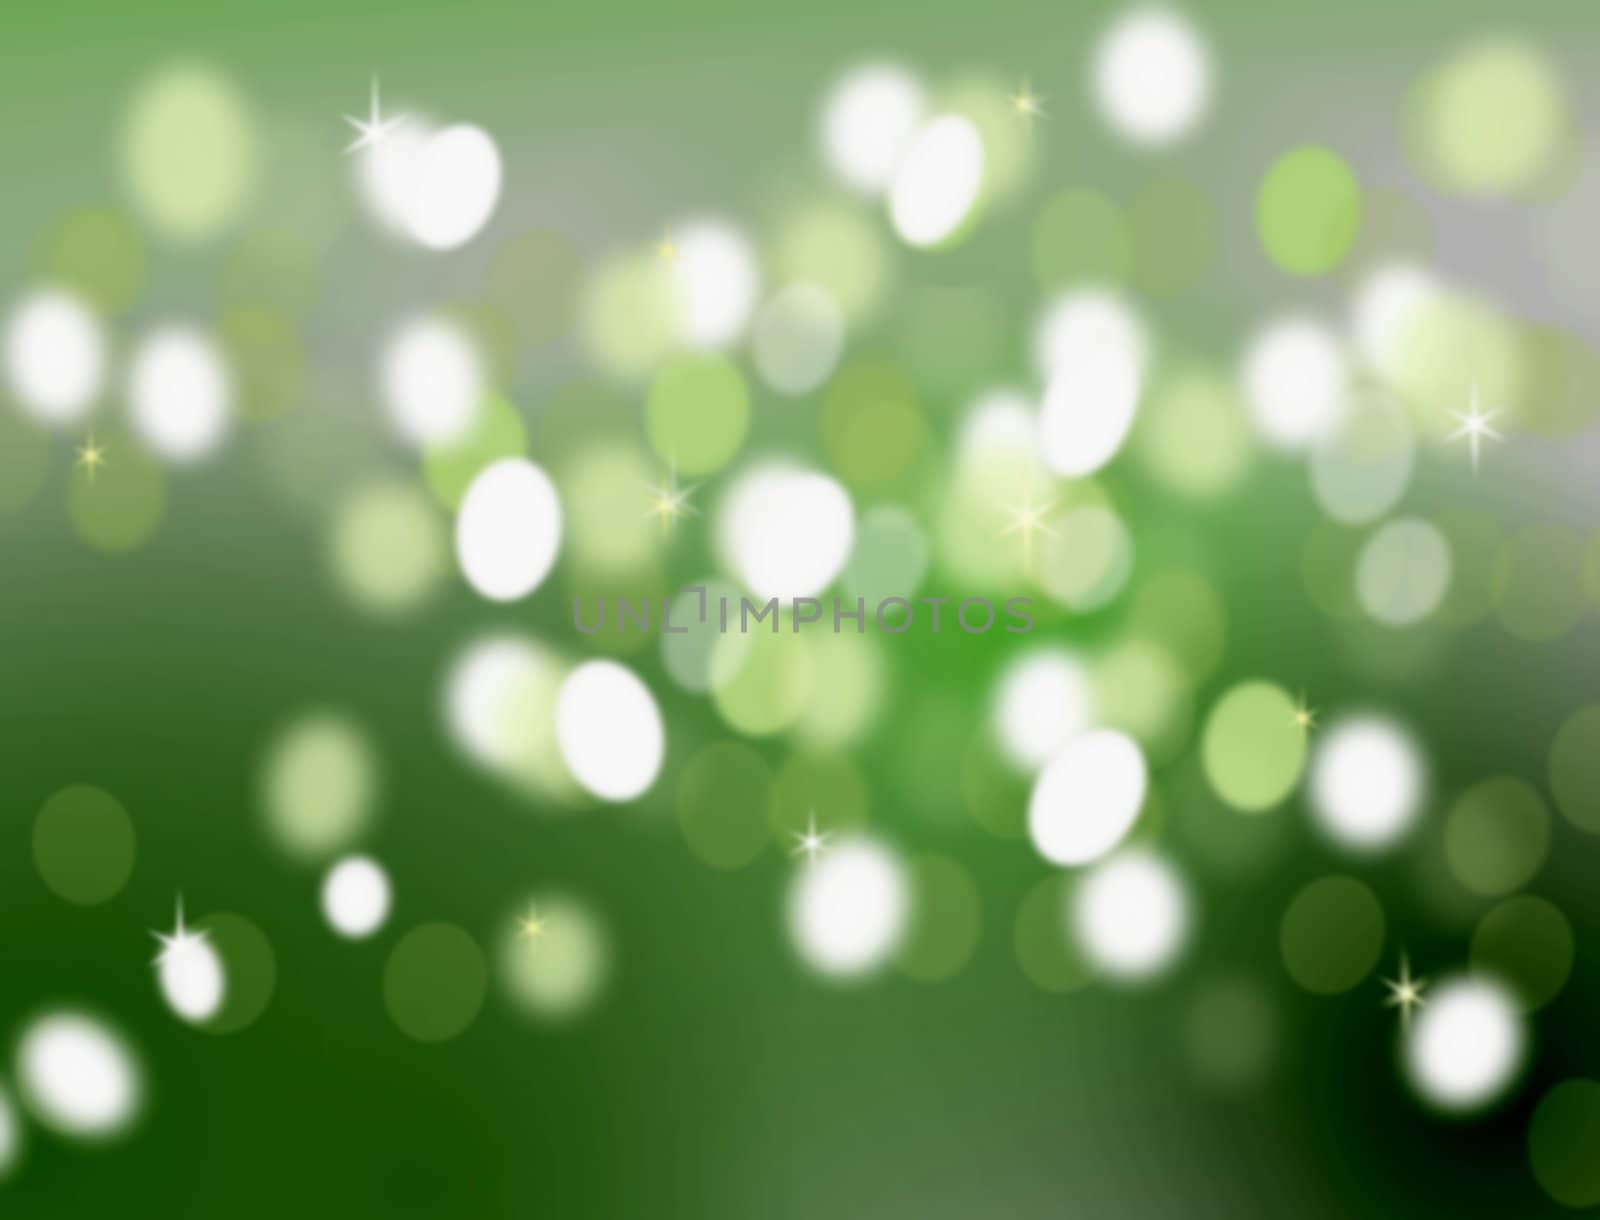 Blur light with green background